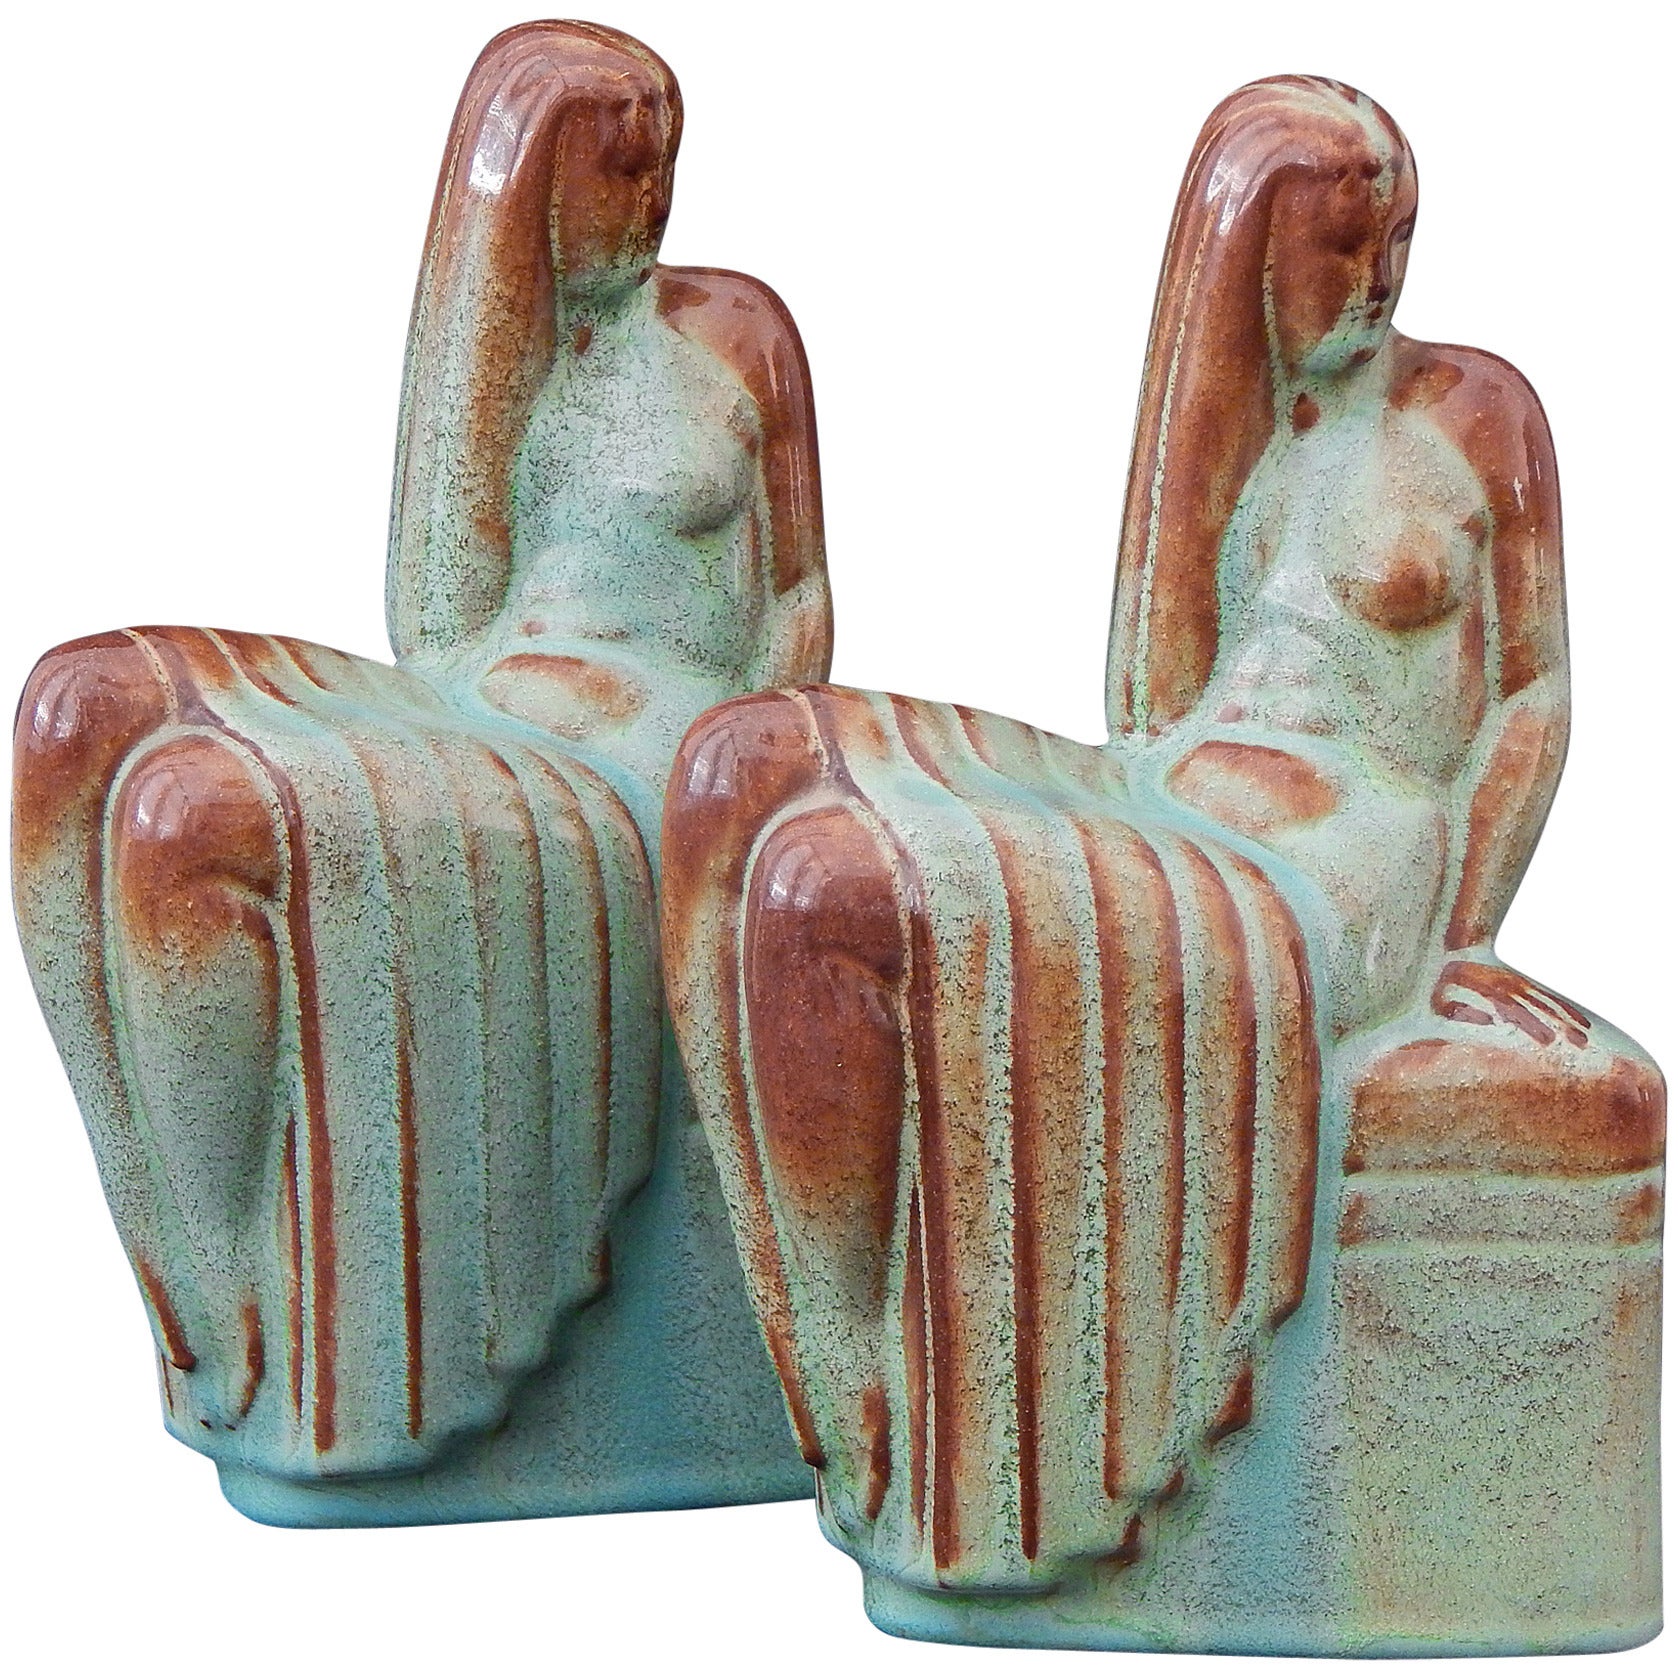 Rare Art Deco Bookends with Female Nudes by Chester Nicodemus, 1940s